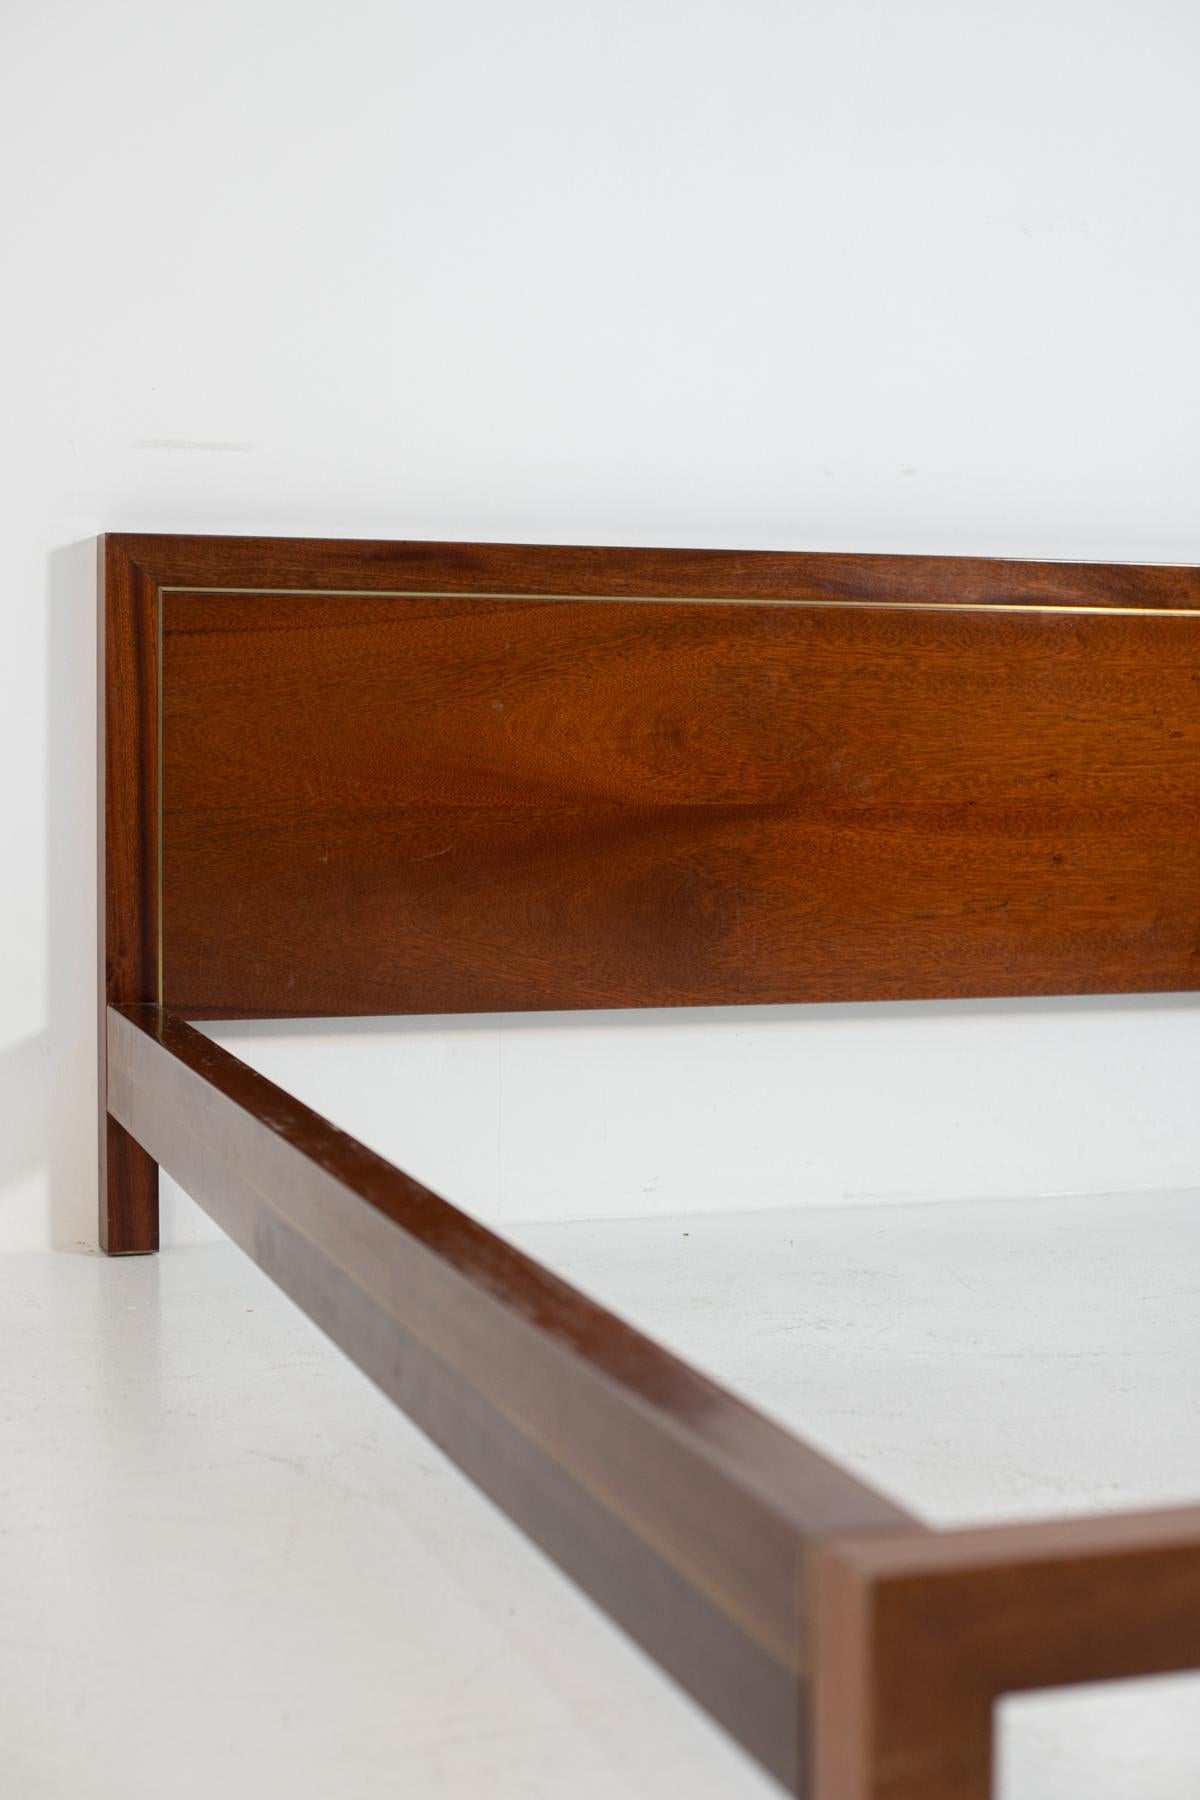 Pierre Balmain Headboard in Wood and Brass, Signed, 1980s For Sale 2